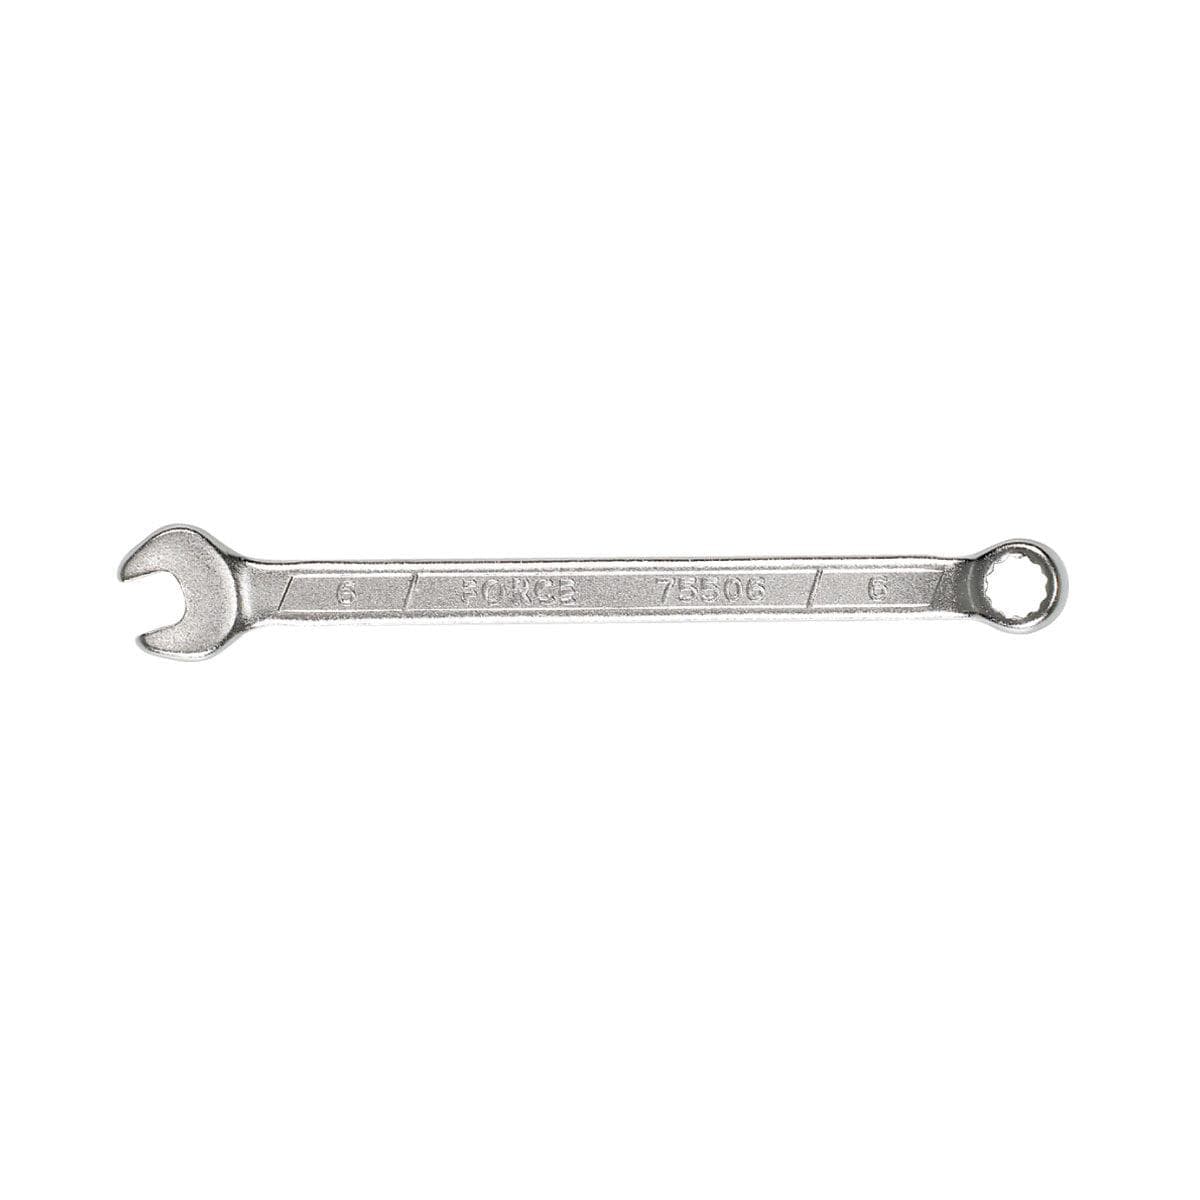 Cyclo 25Mm Open/Ring Spanner: